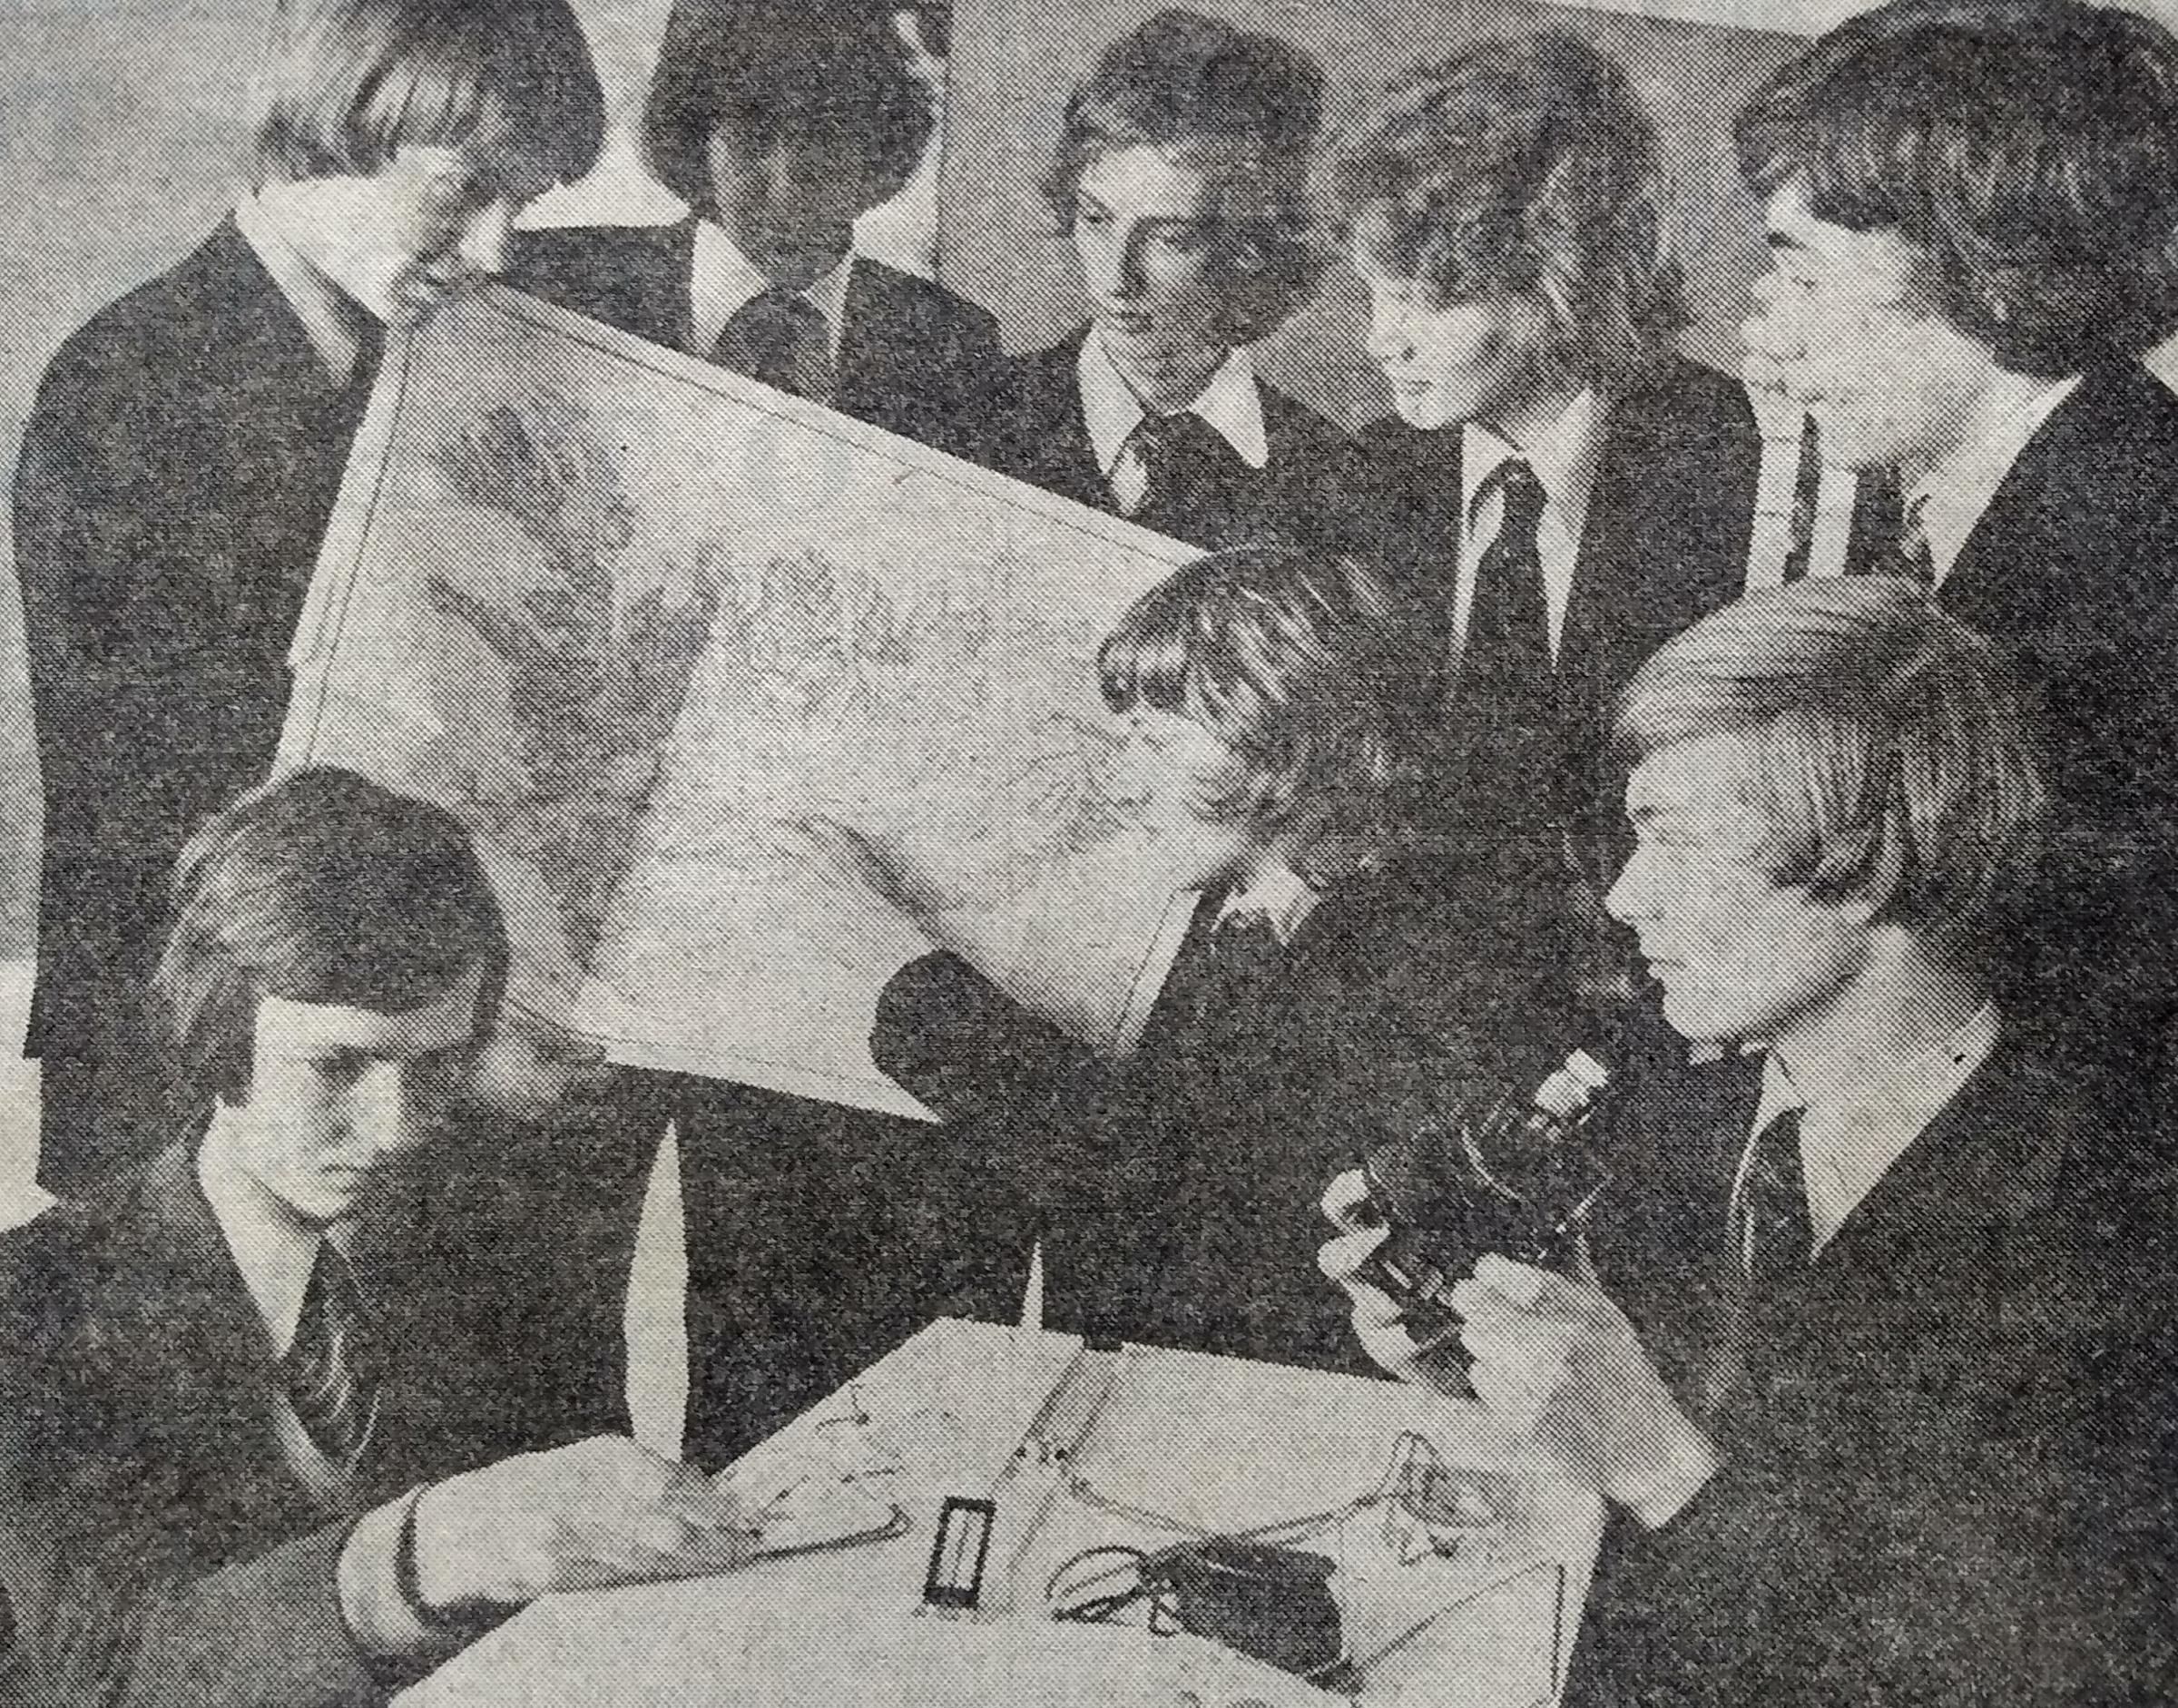 It’s April 1975 and a group of Evesham High School pupils were preparing for a summer trip northern Iceland to study a glacier as part of a 70-strong expedition organised by the British Schools Exploring Society